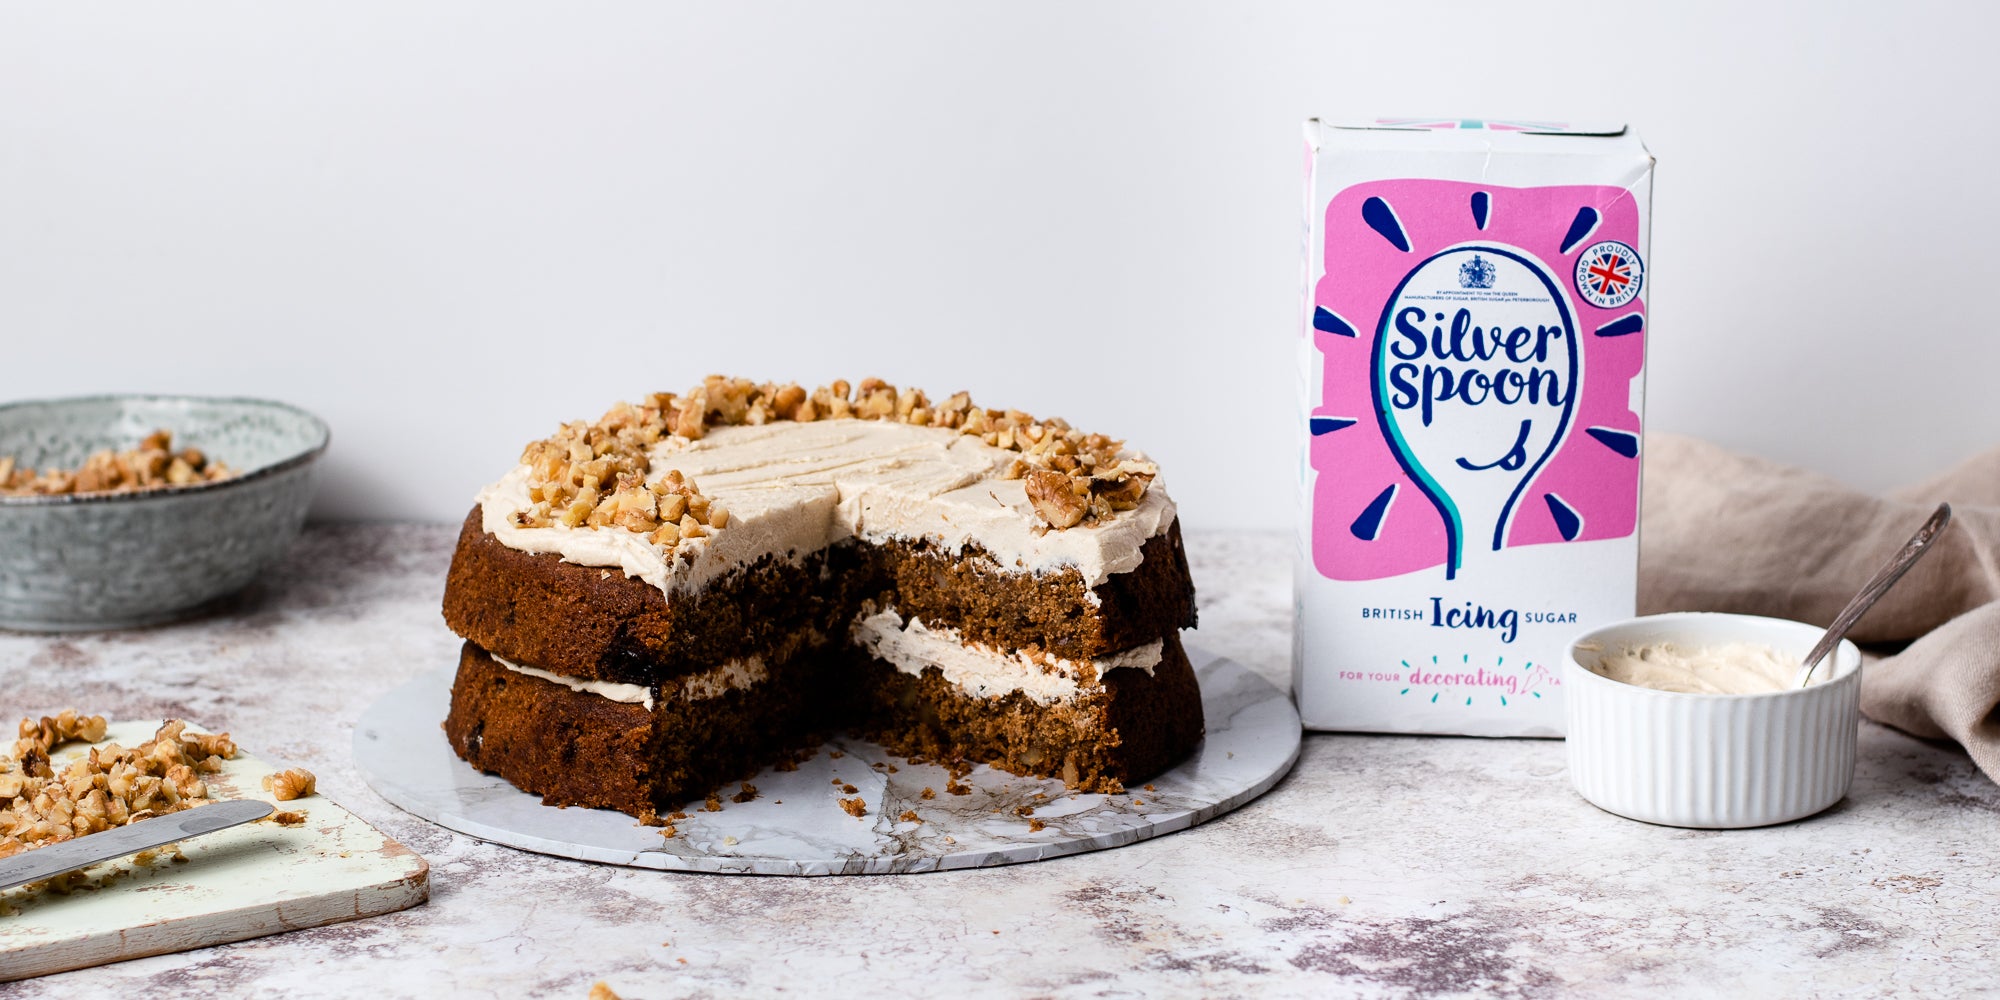 Gluten Free Vegan Coffee Cake on a cake board with a slice cut out, next to a box of silver spoon icing sugar